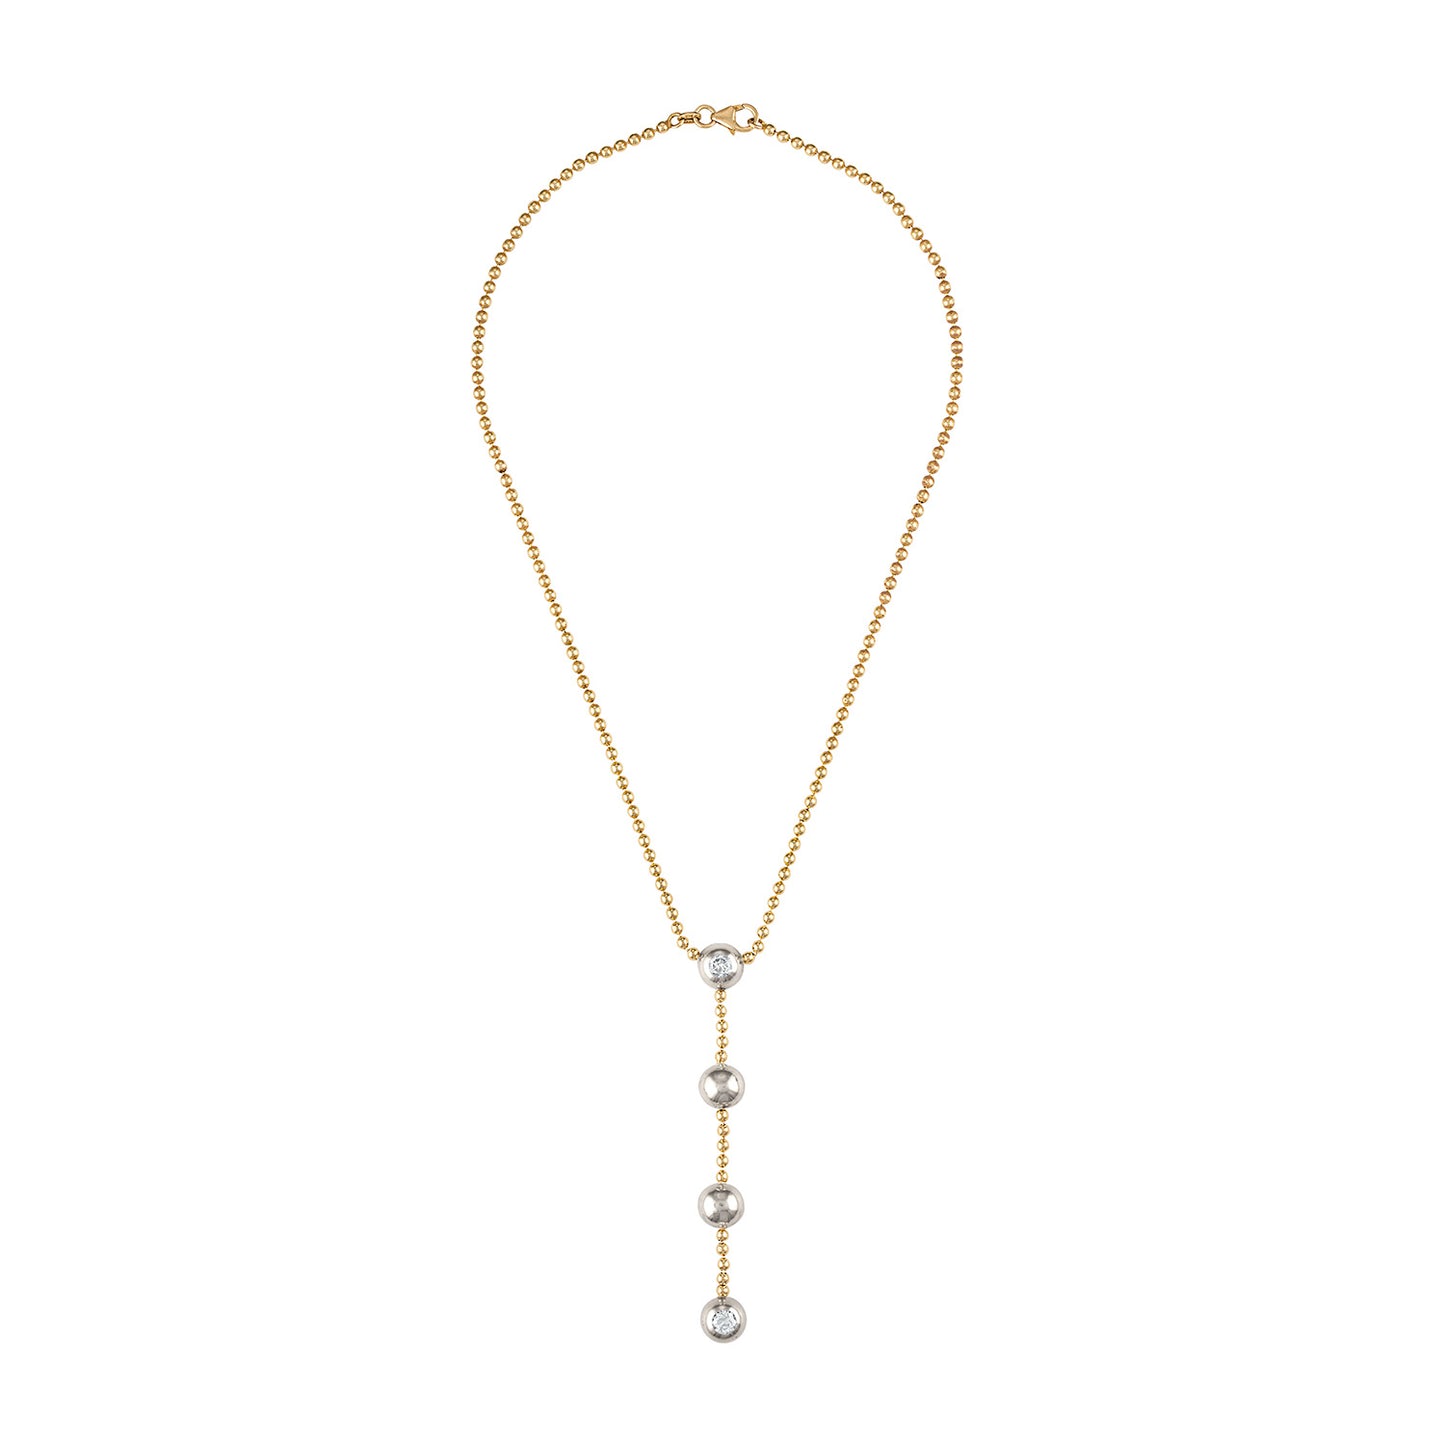 The Vintage Diamond Lariat-14K Yellow Gold Necklace with 2 Round Cut Diamonds